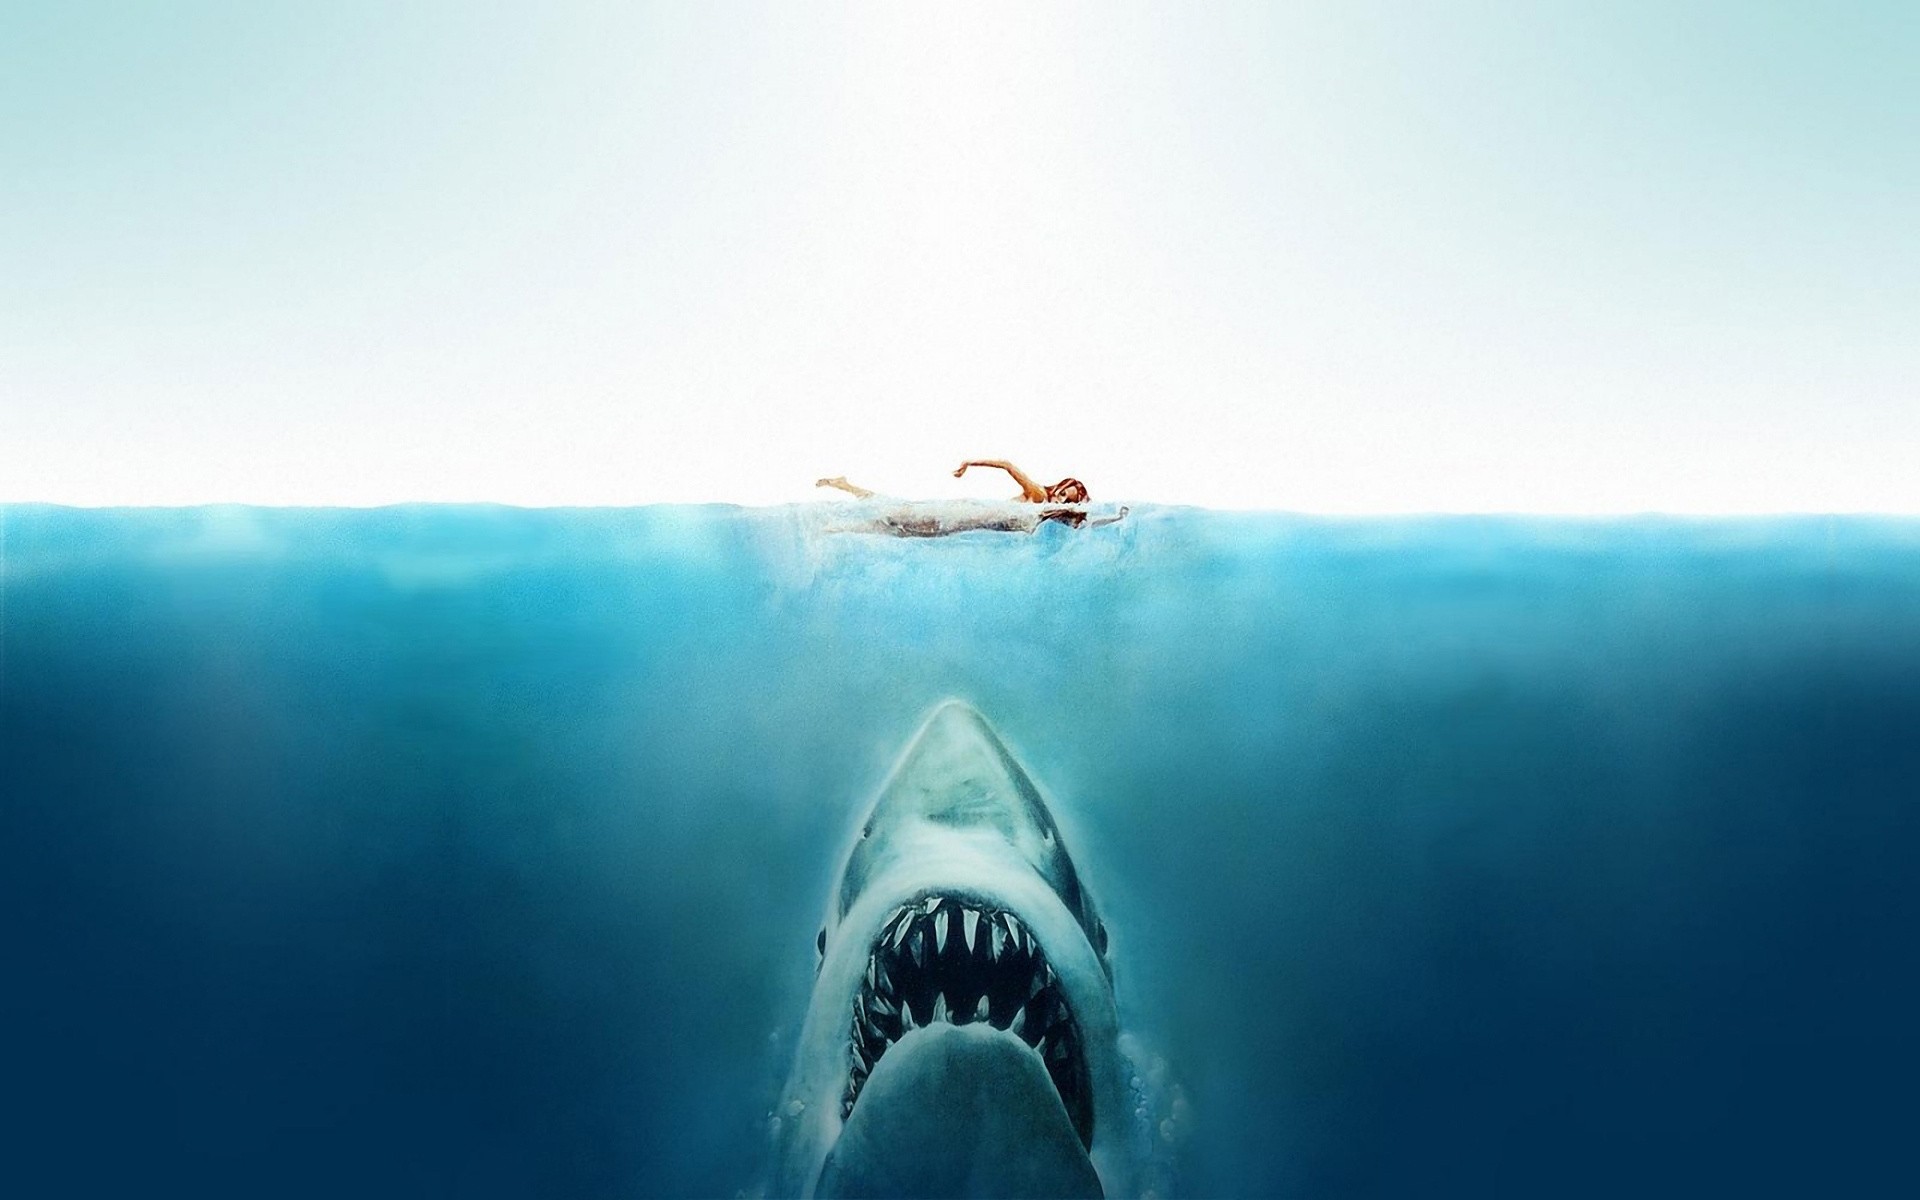 Jaws Movies Shark Split View Turquoise Sea Movie Poster 1920x1200